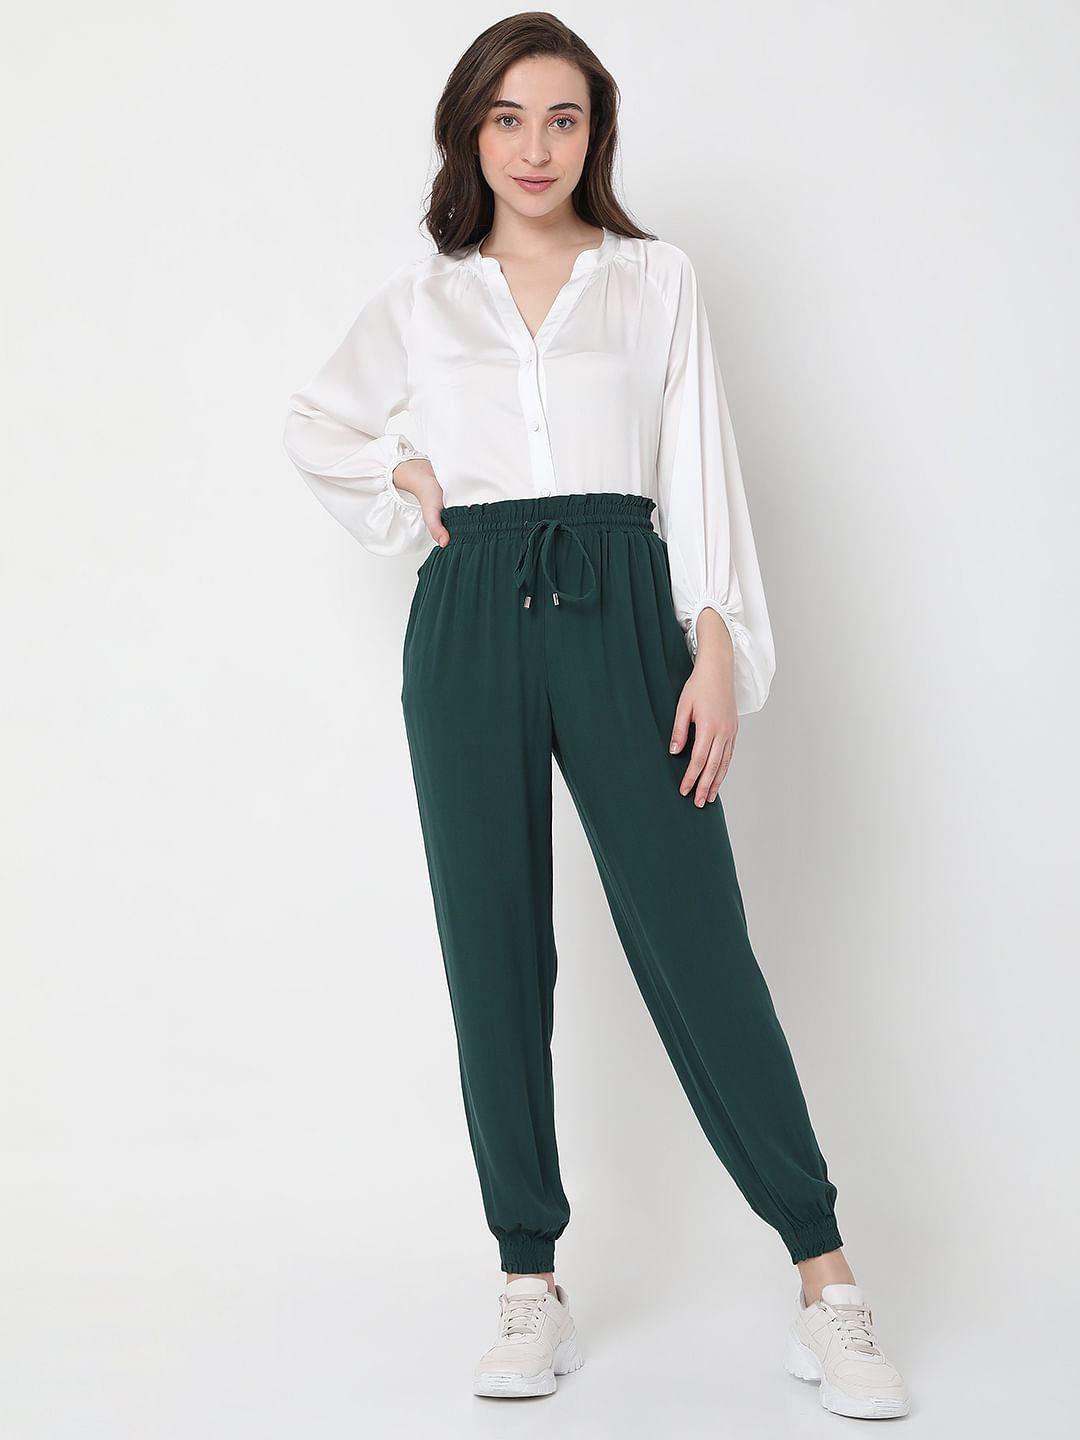 Buy Olive Green Straight Pants Online - W for Woman